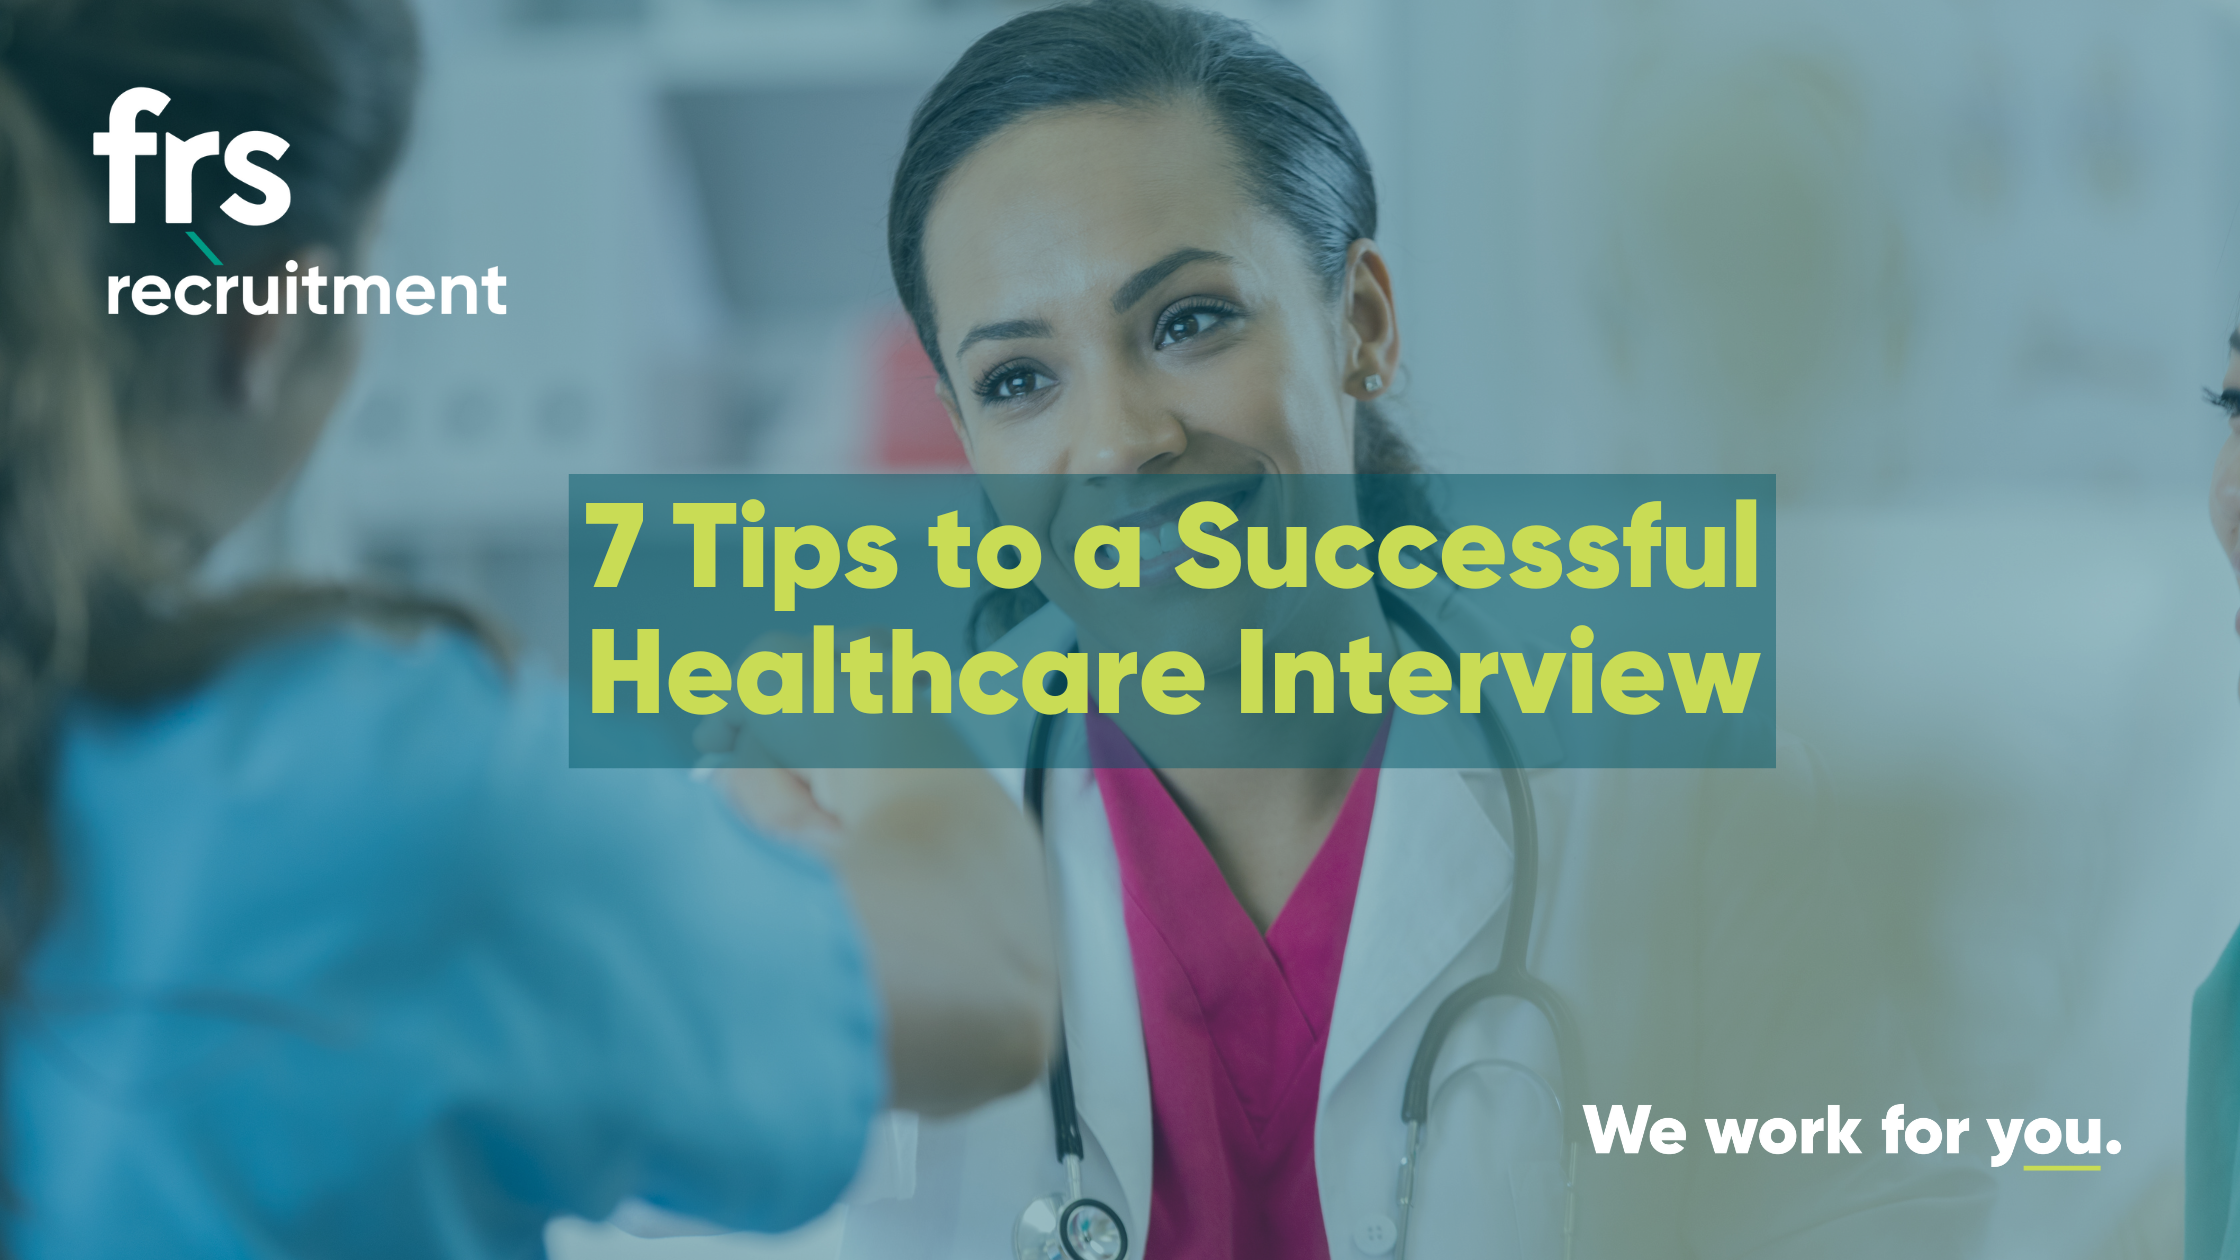 7 Tips to a Successful Healthcare Interview